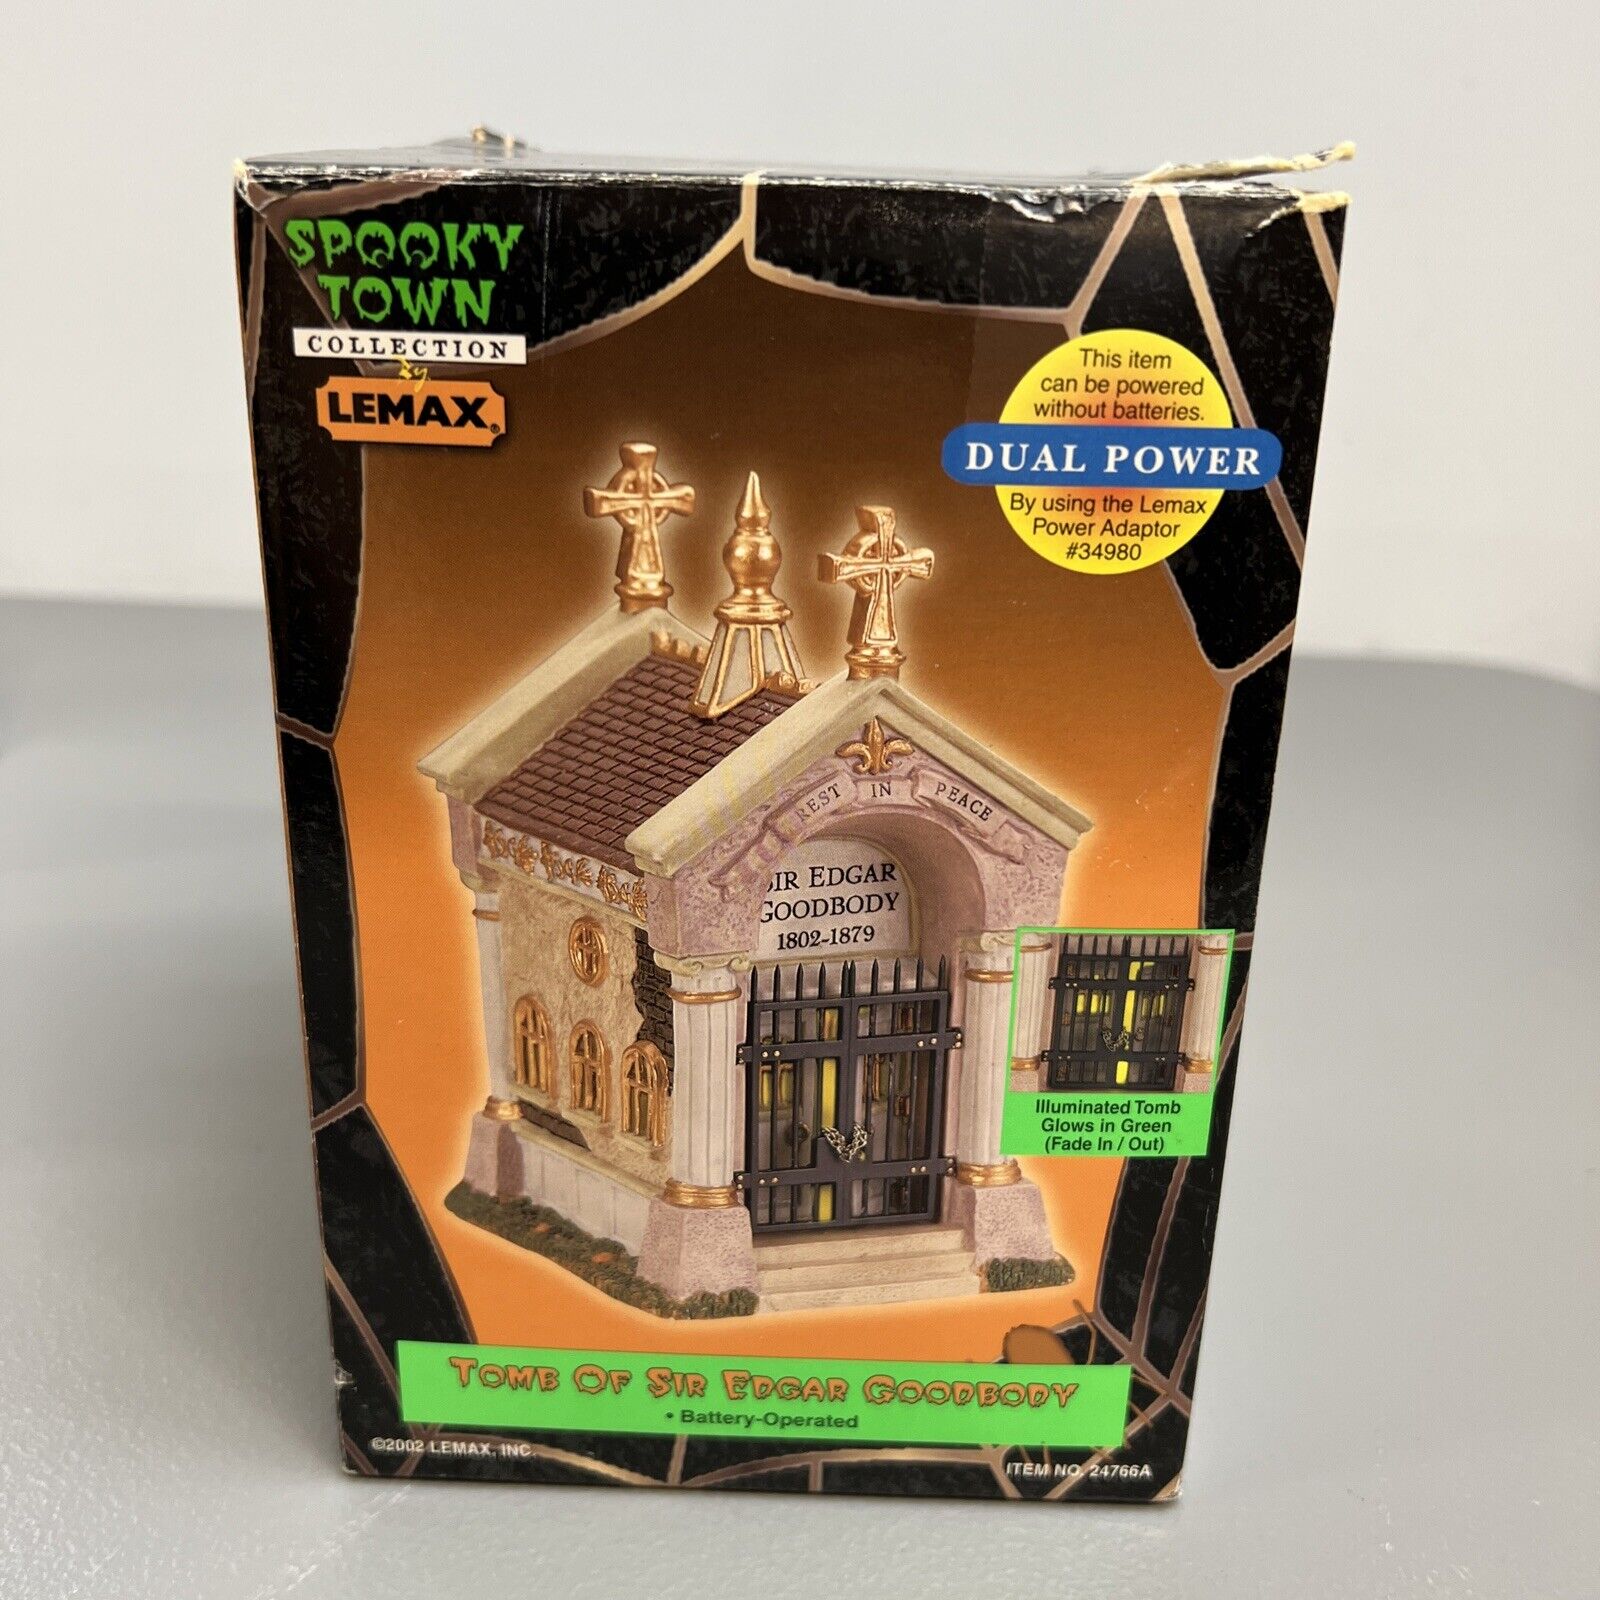 Vtg Lemax Spooky Town Collection “Tomb of Sir Edgar Goodbody” 2002 #24766A